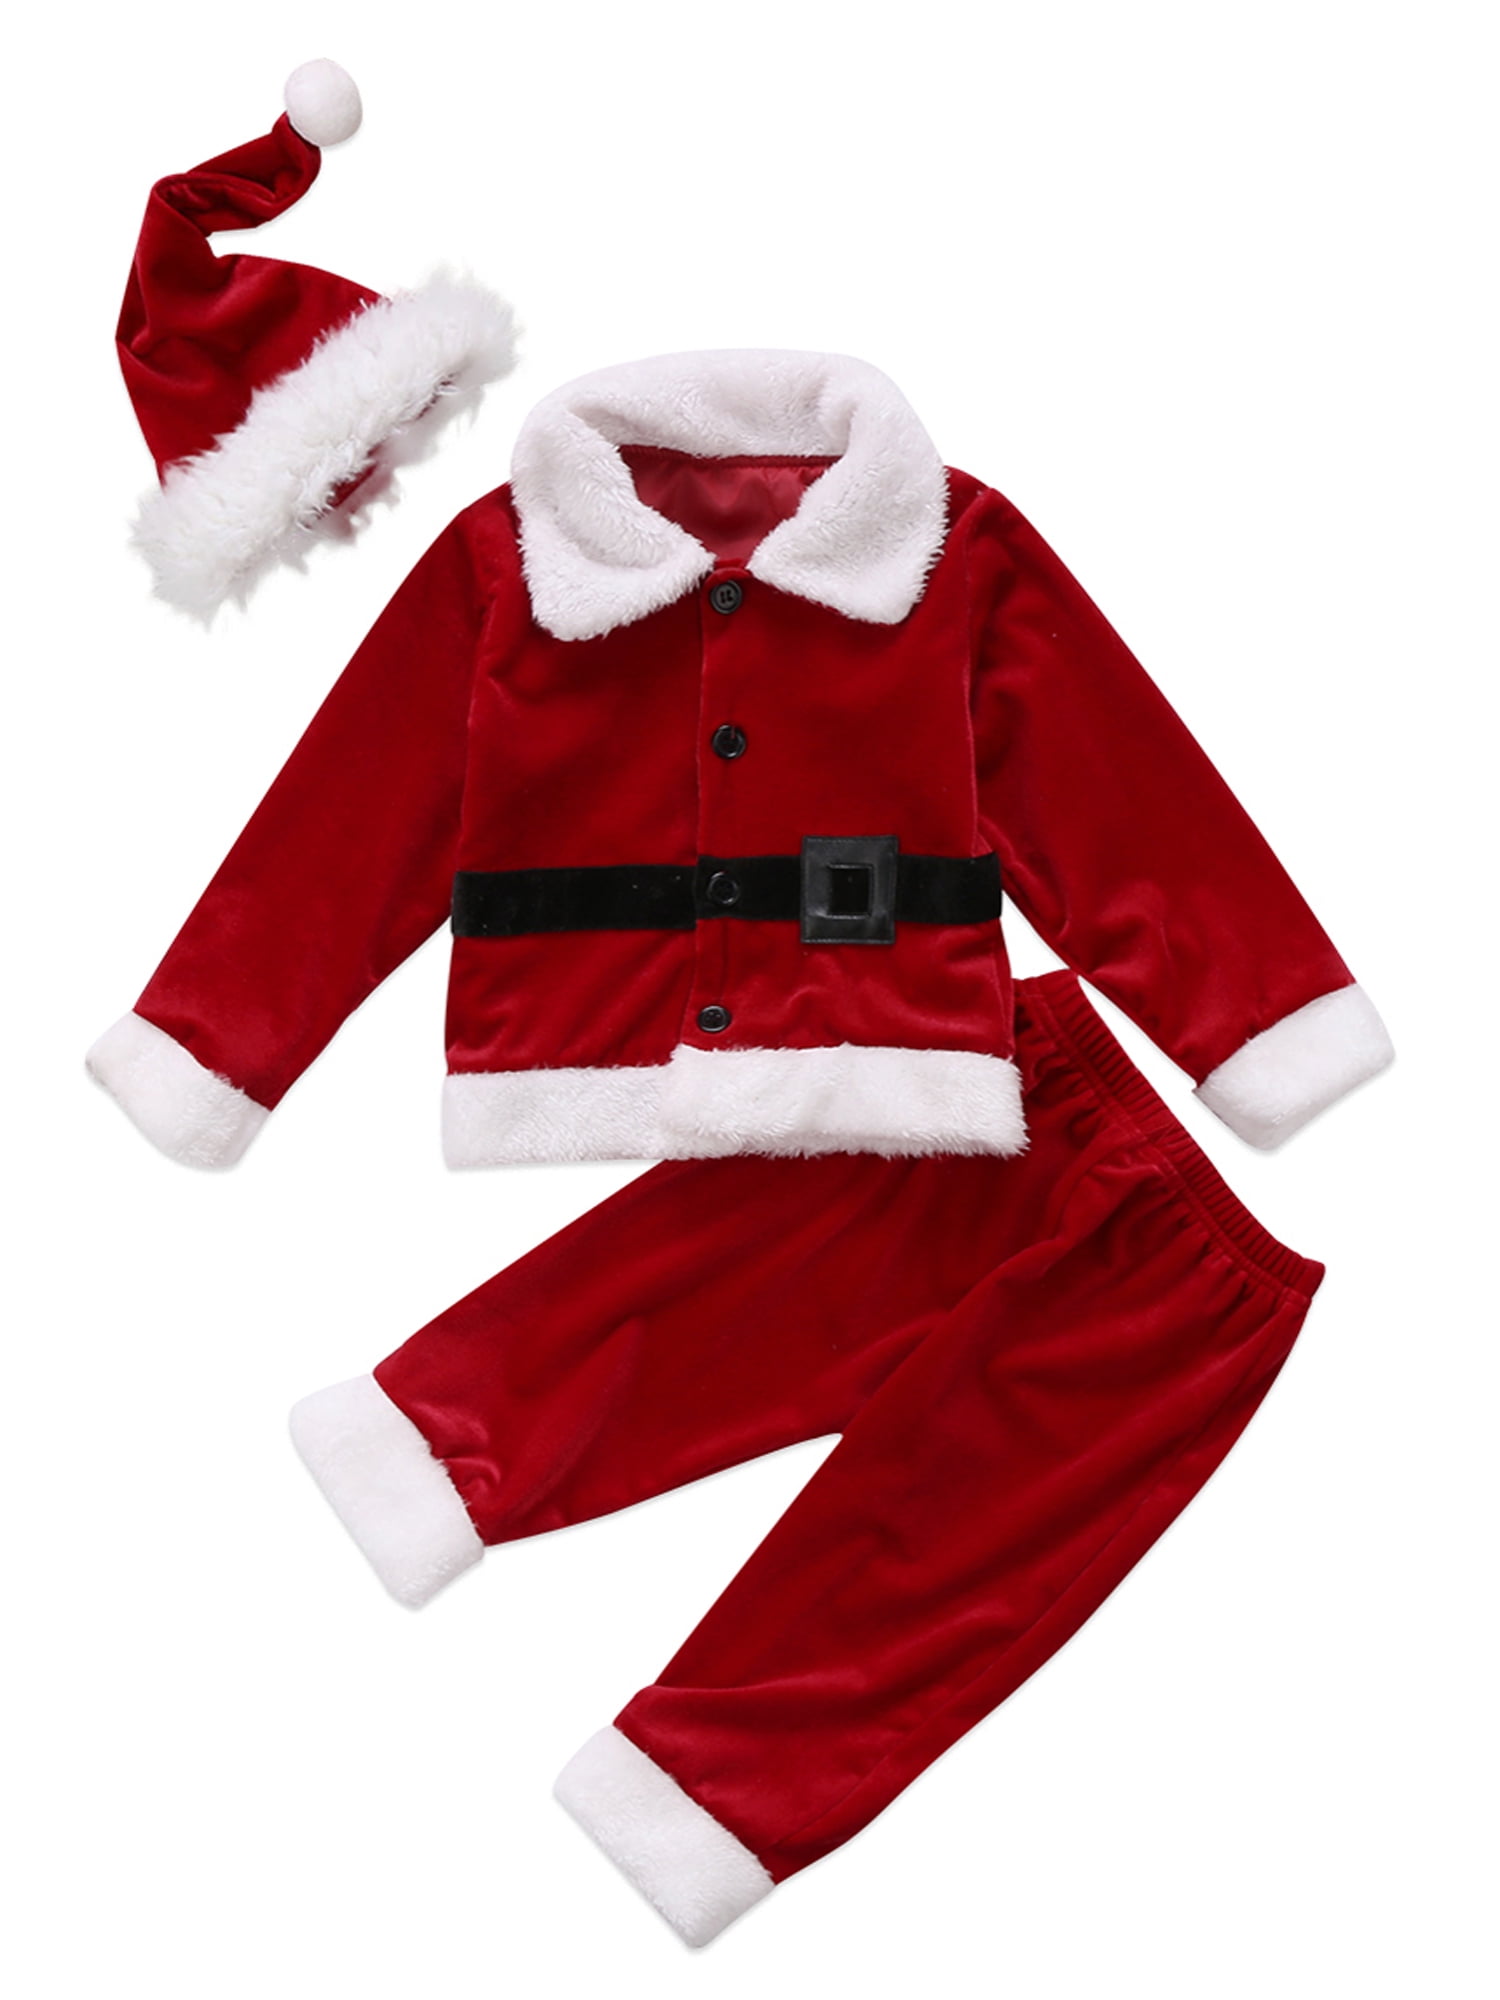 US Baby Girls Santa Claus Outfits Set Christmas Dress Up Cosplay Party Costume 